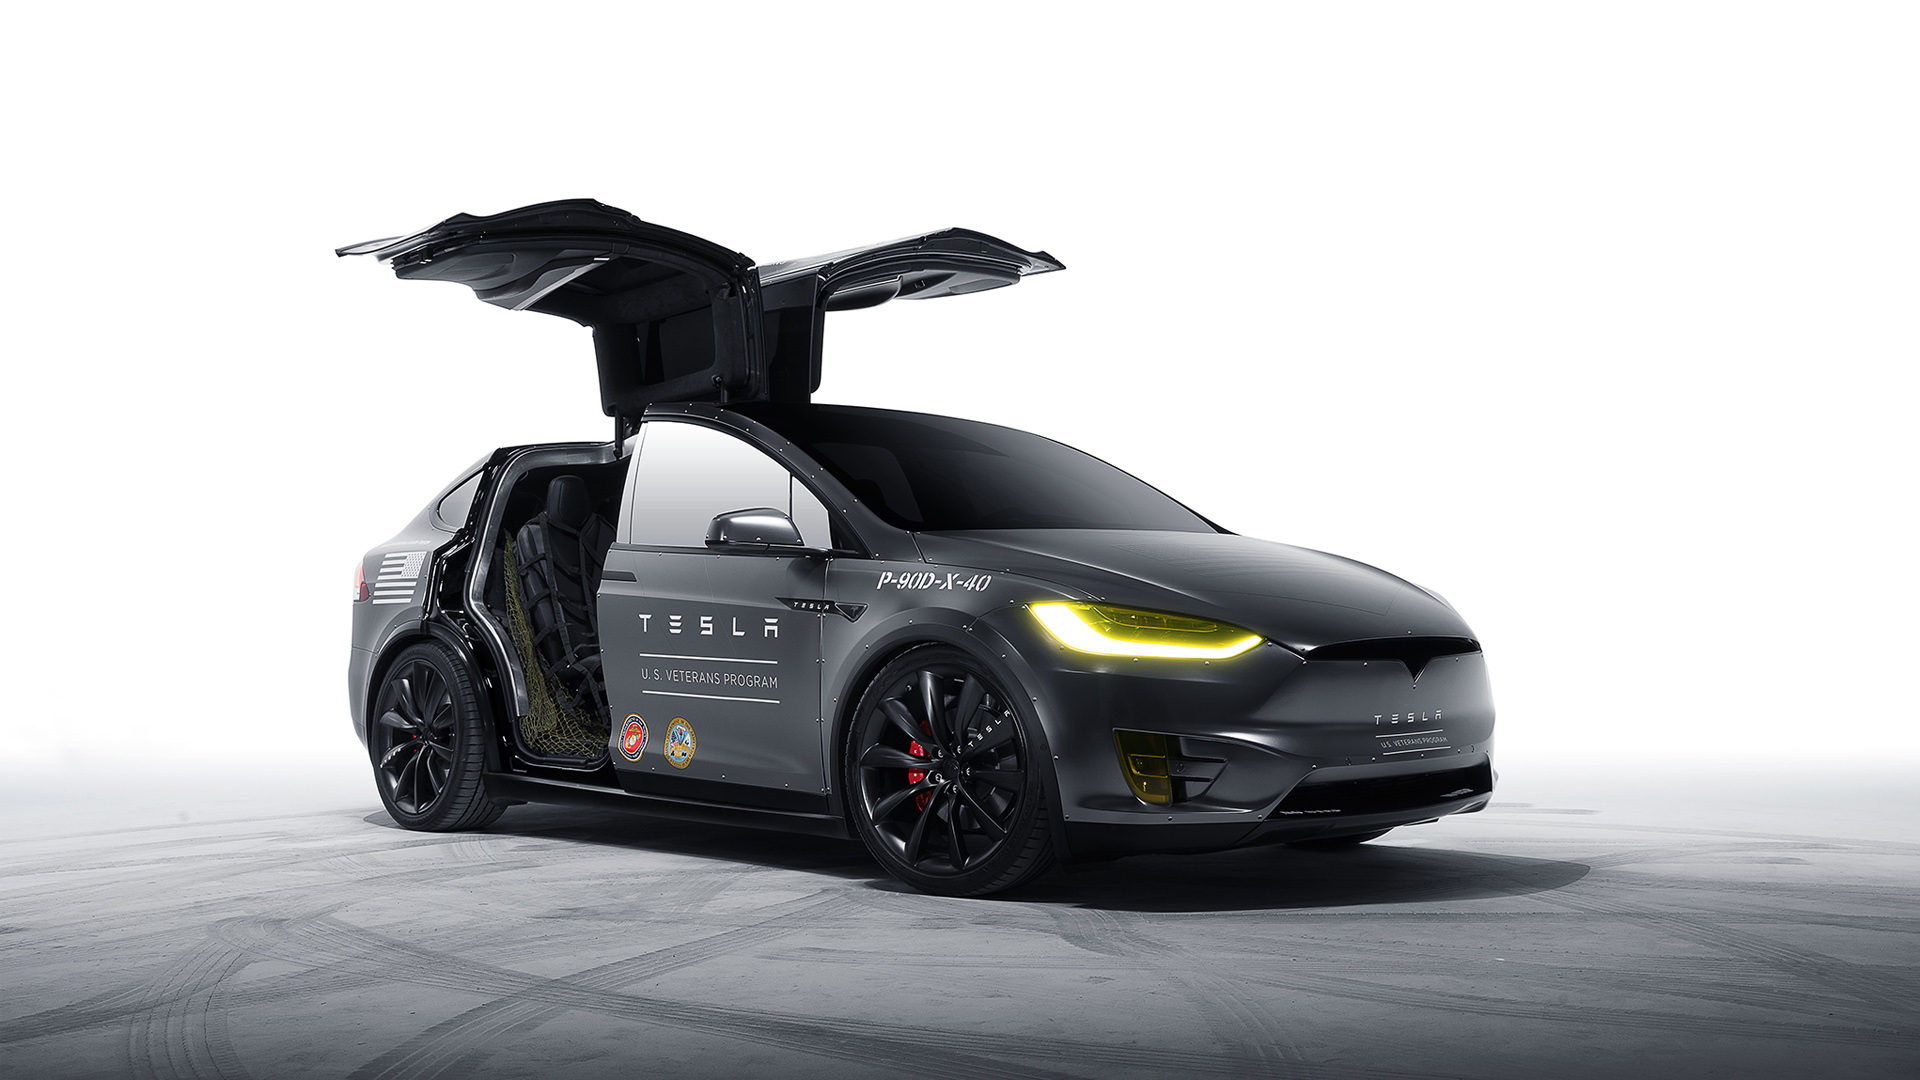 Tesla is accelerating the world's transition to sustainable energy with electric cars, solar and integrated renewable energy solutions for homes and businesses. Model X Tesla Motors Wallpaper | HD Car Wallpapers | ID #5976